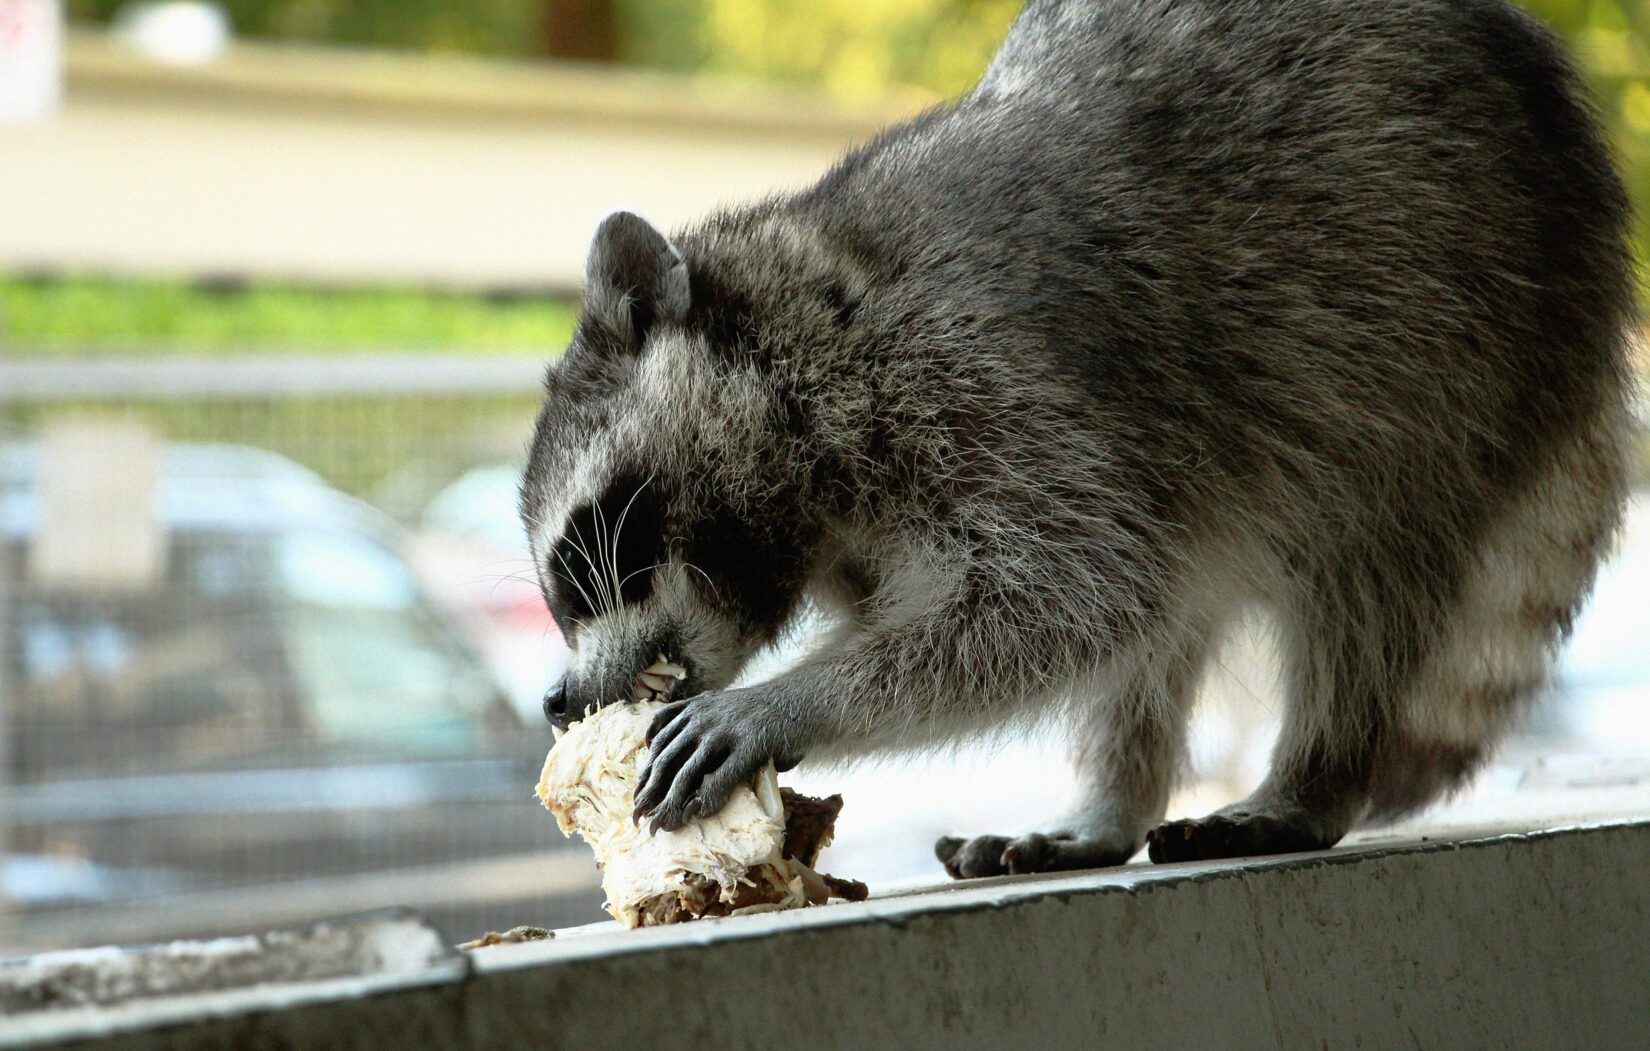 Raccoon eating discarded chicken